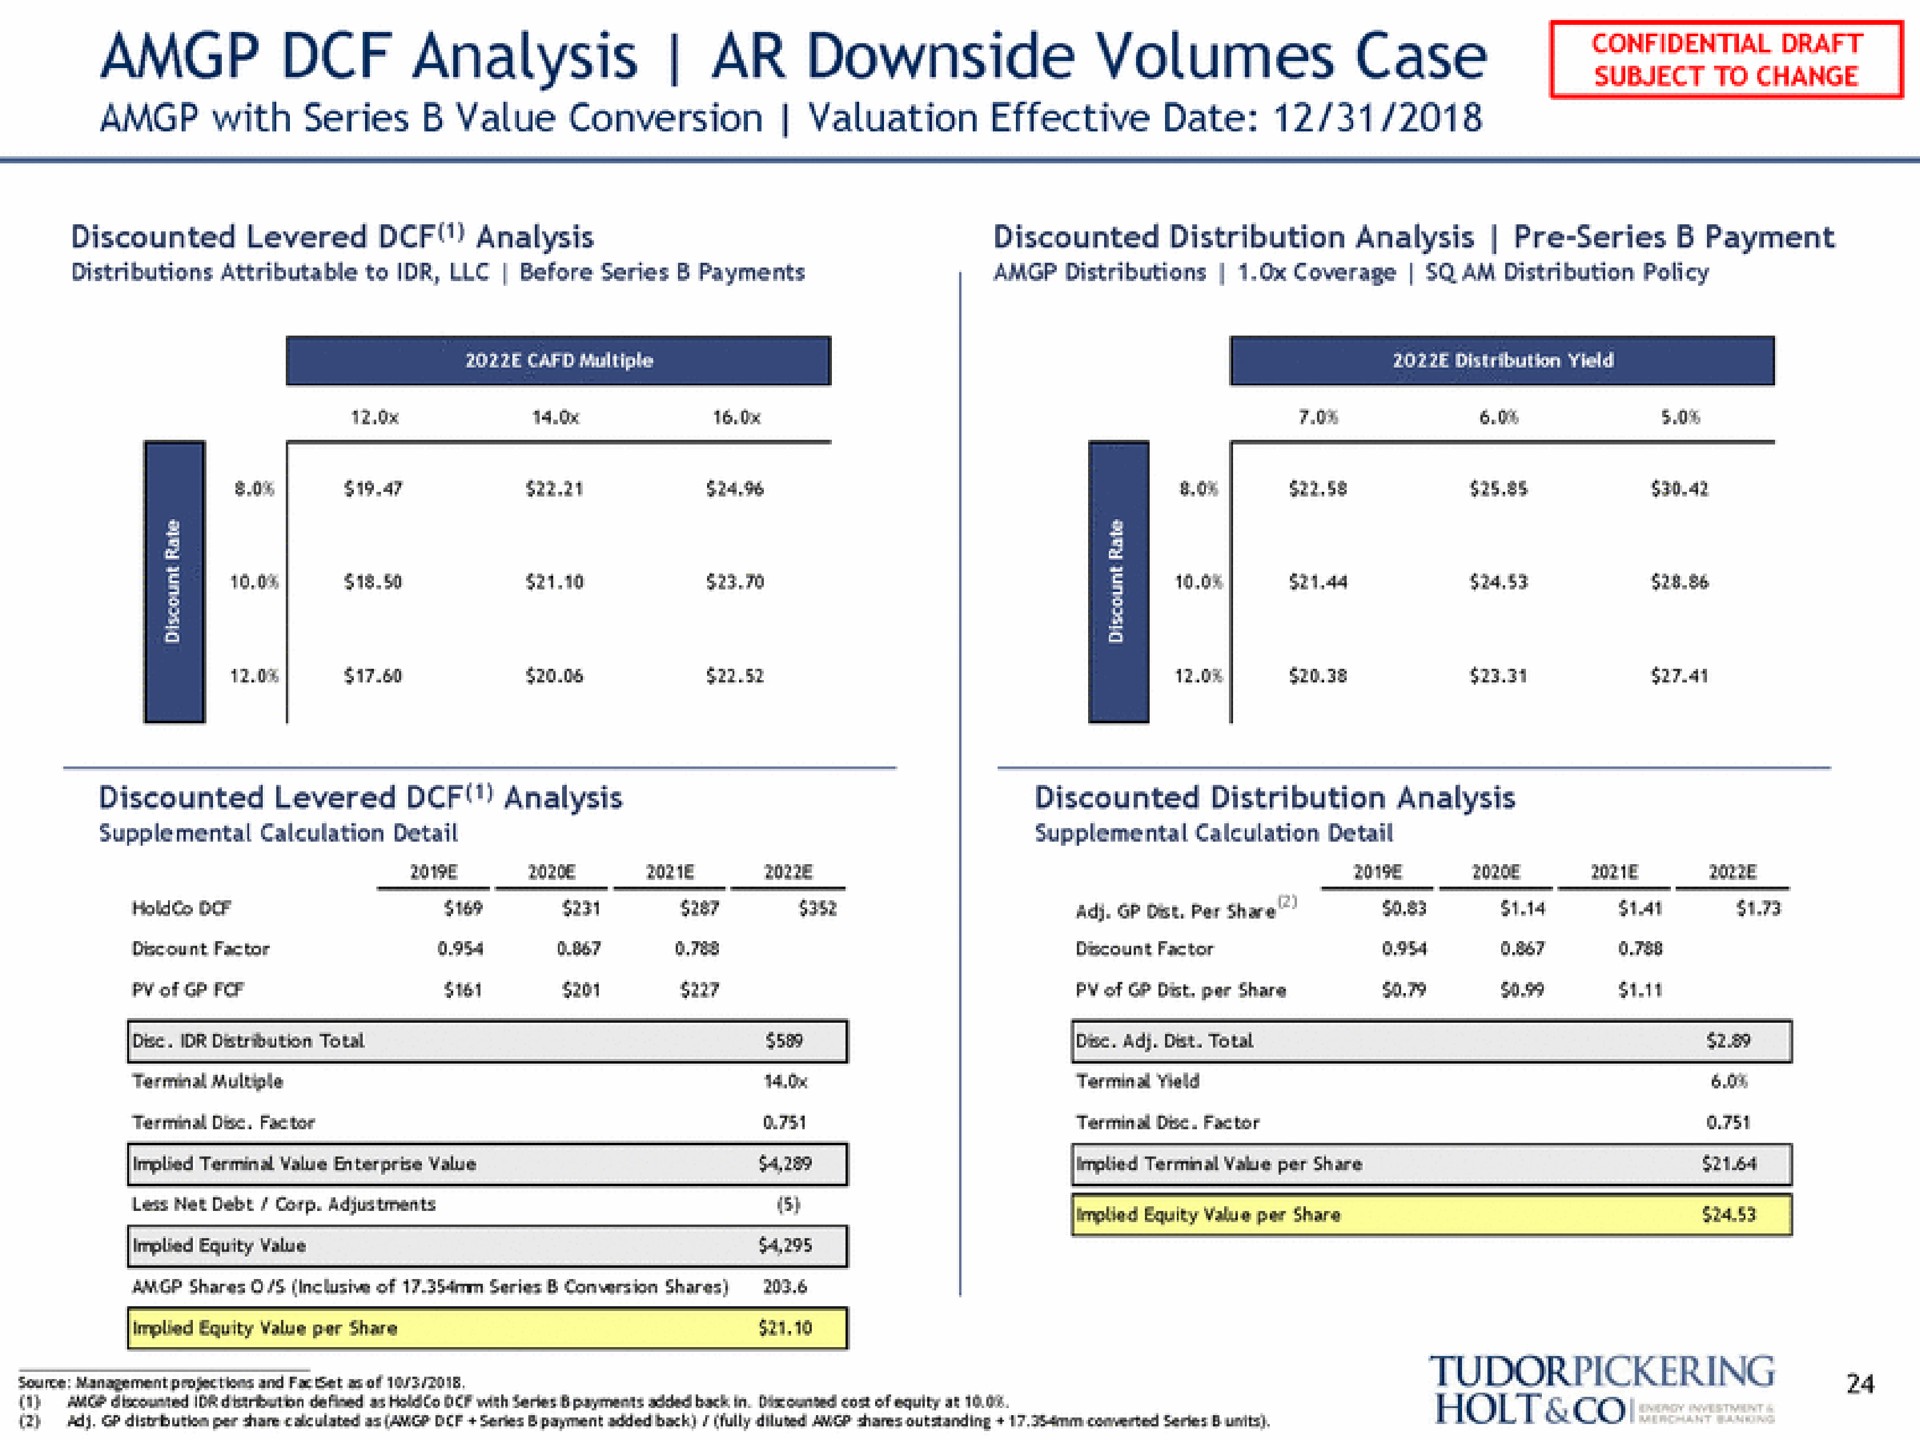 analysis downside volumes case confidential draft subject to change holds holt a | Tudor, Pickering, Holt & Co